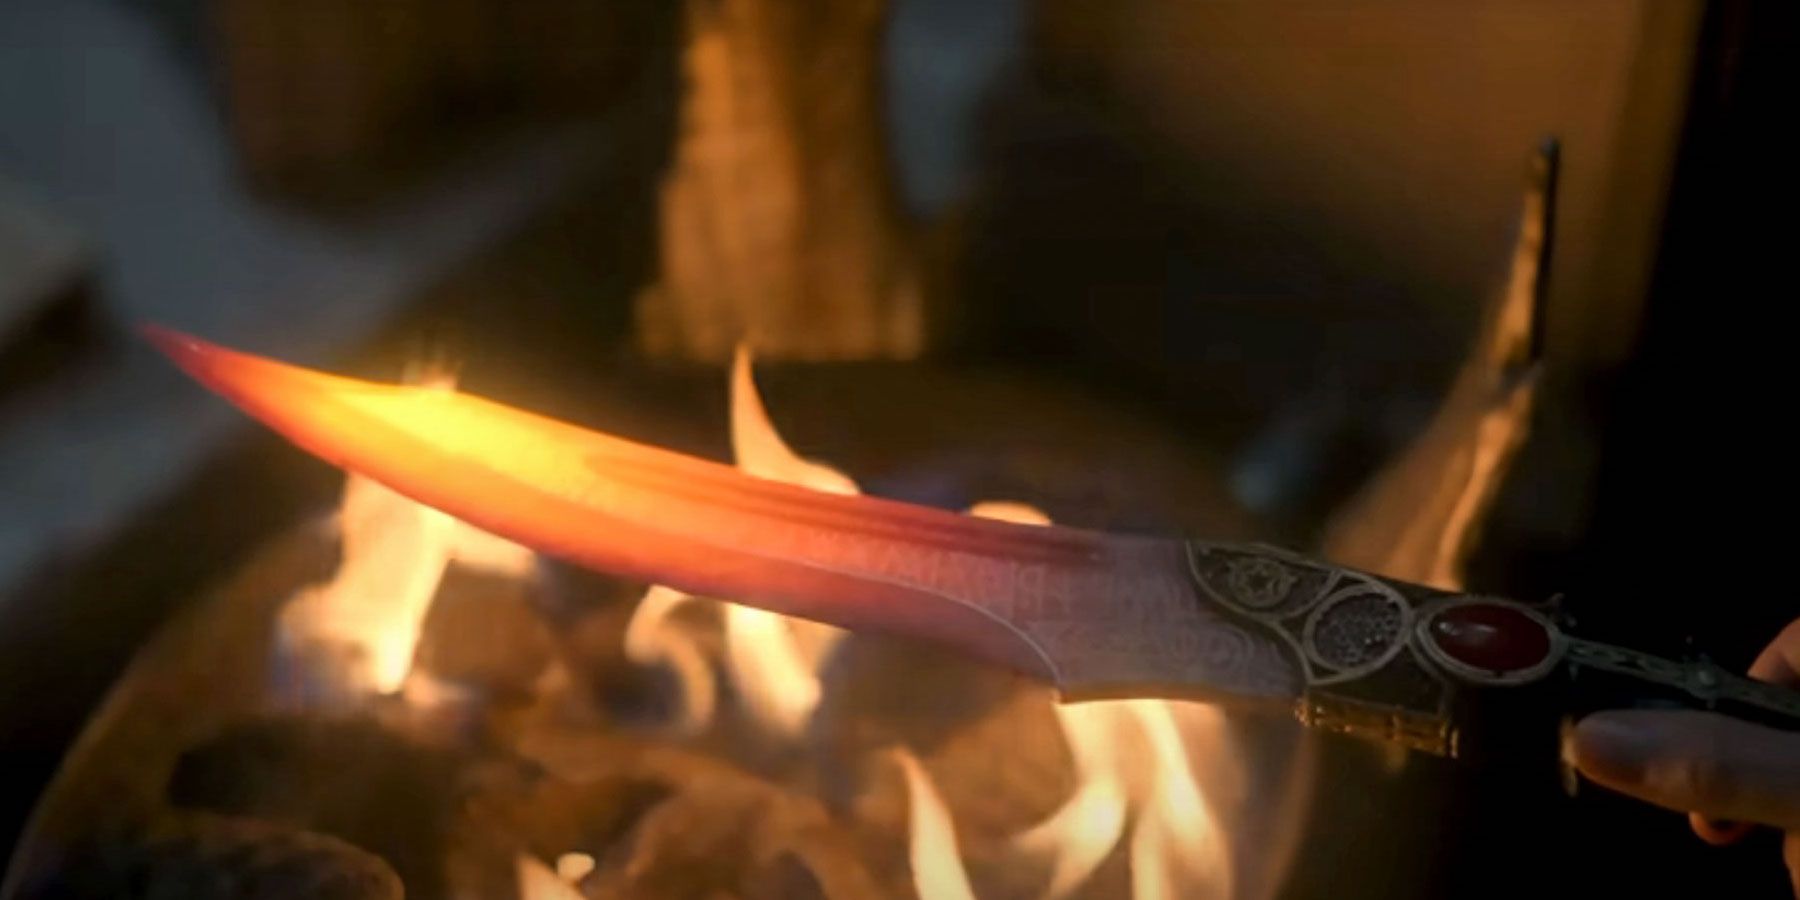 The Valyrian Dagger contains the prophecy of the Prince That Was Promised.